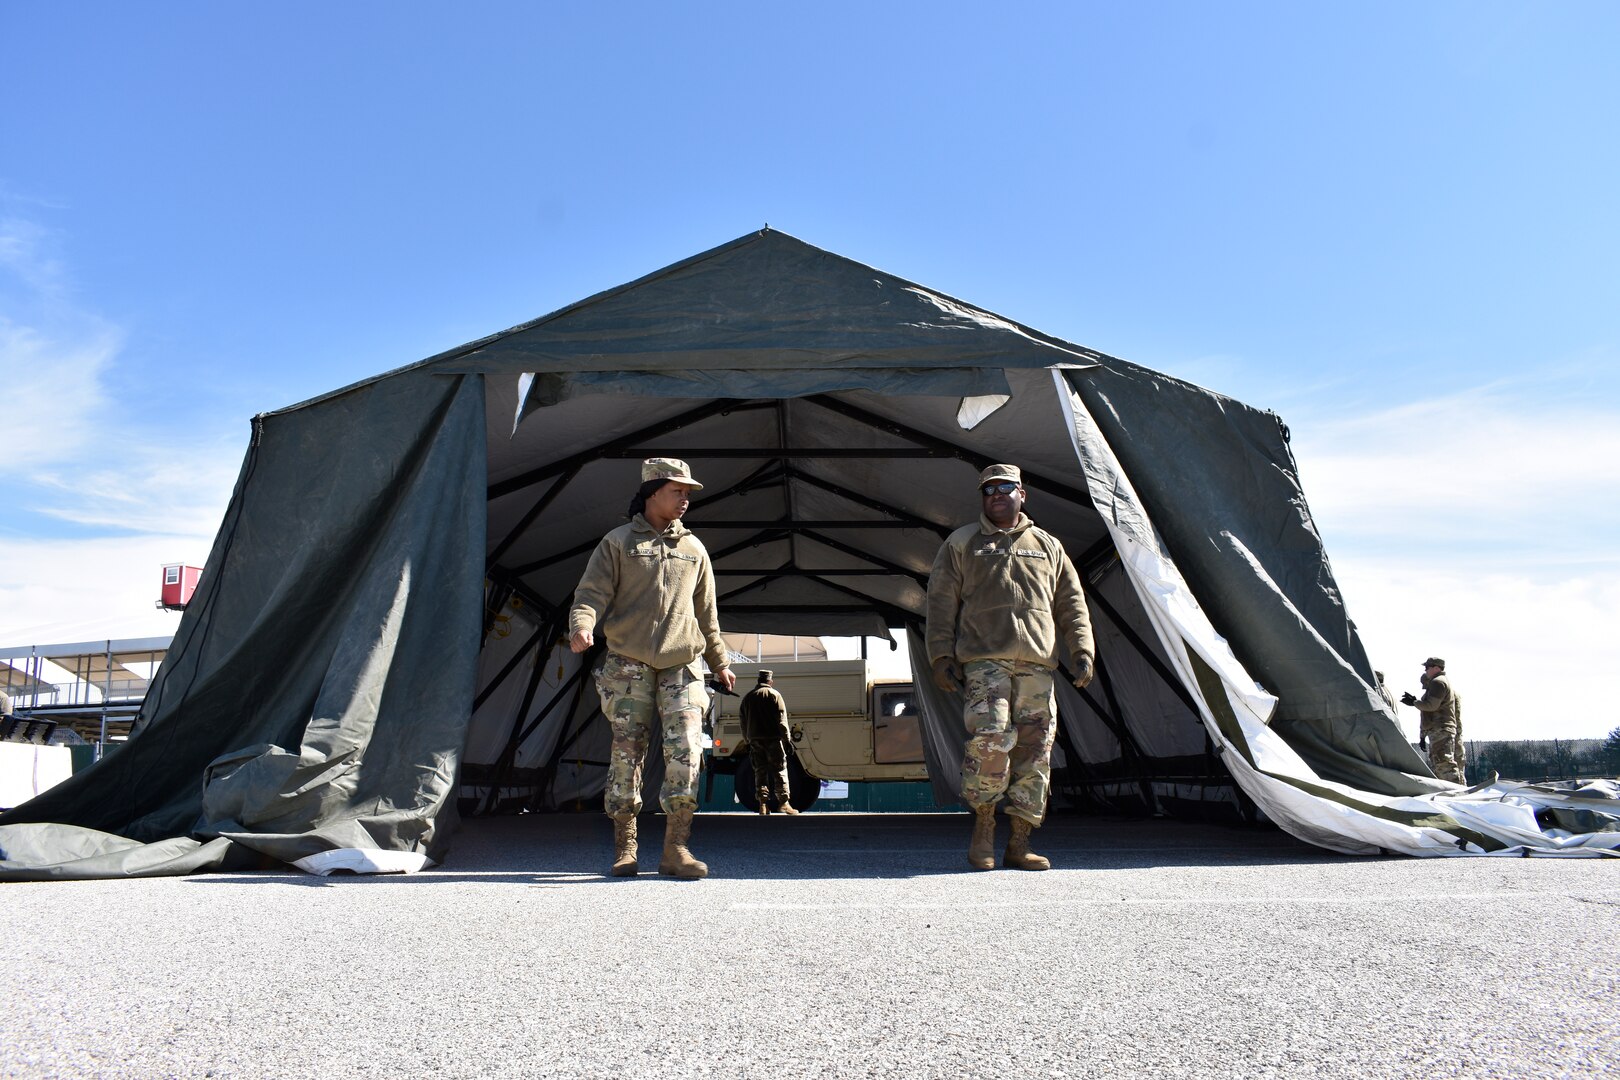 Members of the Maryland Army National Guard’s 1297th Combat Sustainment Support Battalion and 1729th Maintenance Company, both based in Havre de Grace, and the 1229th Transportation Company, based in Baltimore, set up shelters and medium tents at a COVID-19 test site in a parking lot outside of Pimlico Race Course in Baltimore April 3, 2020.